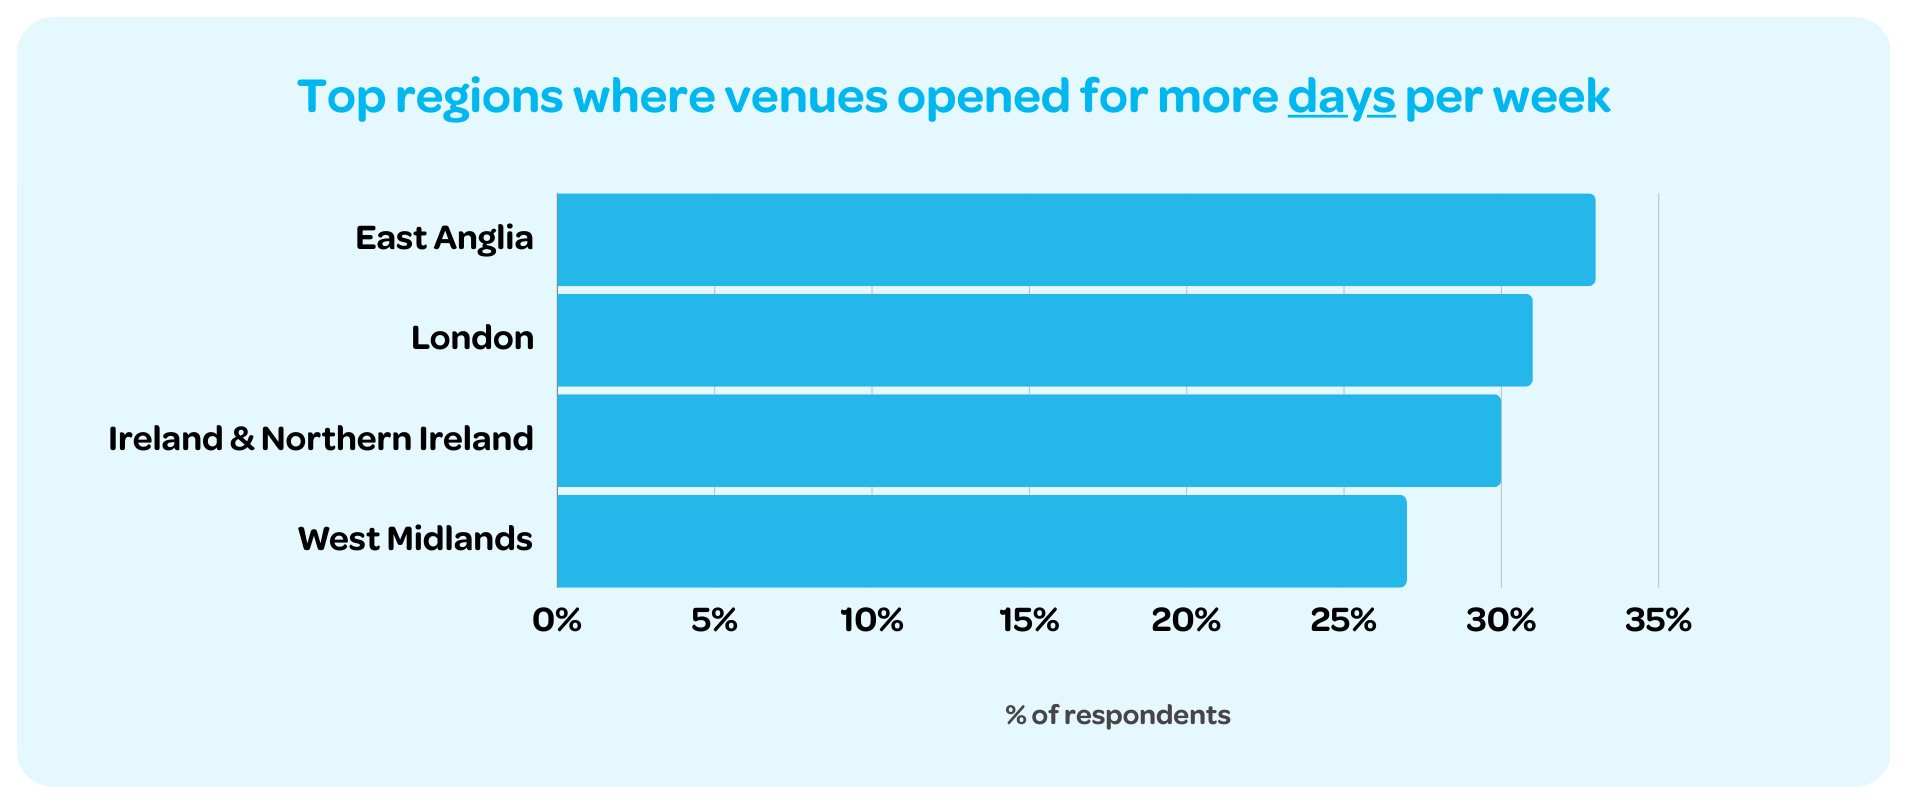 East Anglia was the top region where venues opened more days per week in 2023